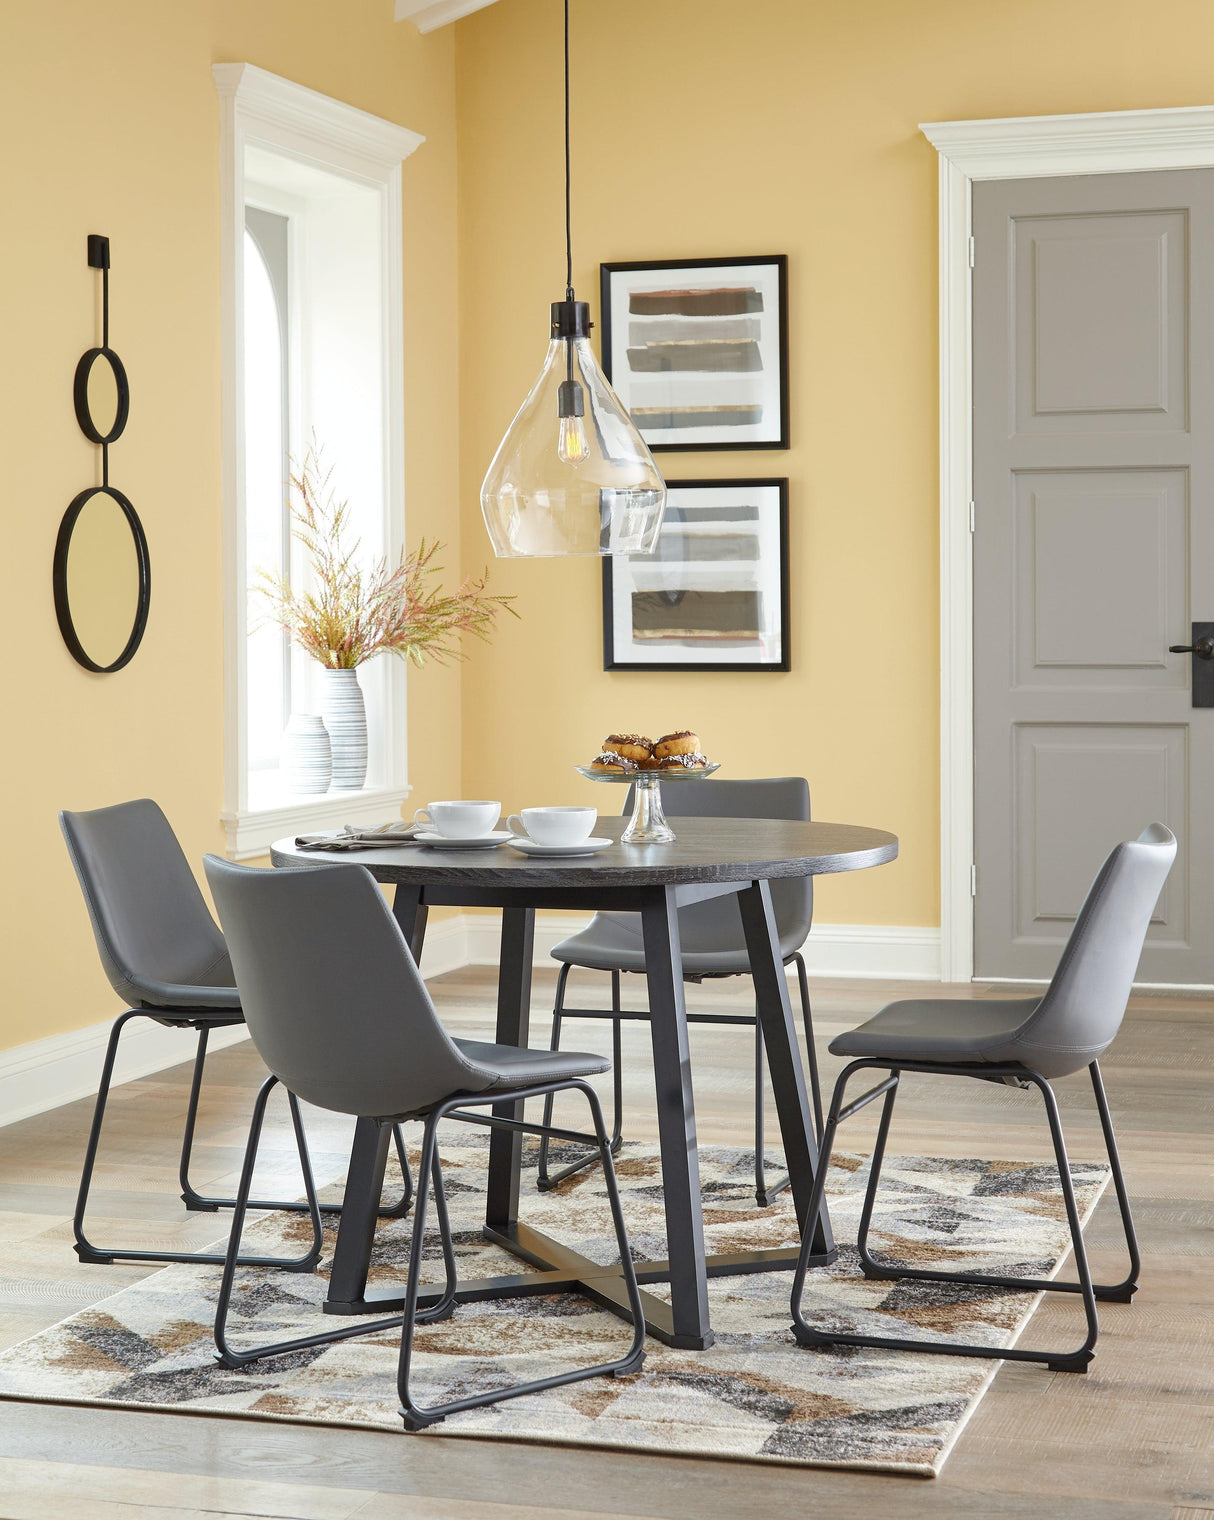 Centiar Gray Dining Table And 4 Chairs - Ella Furniture